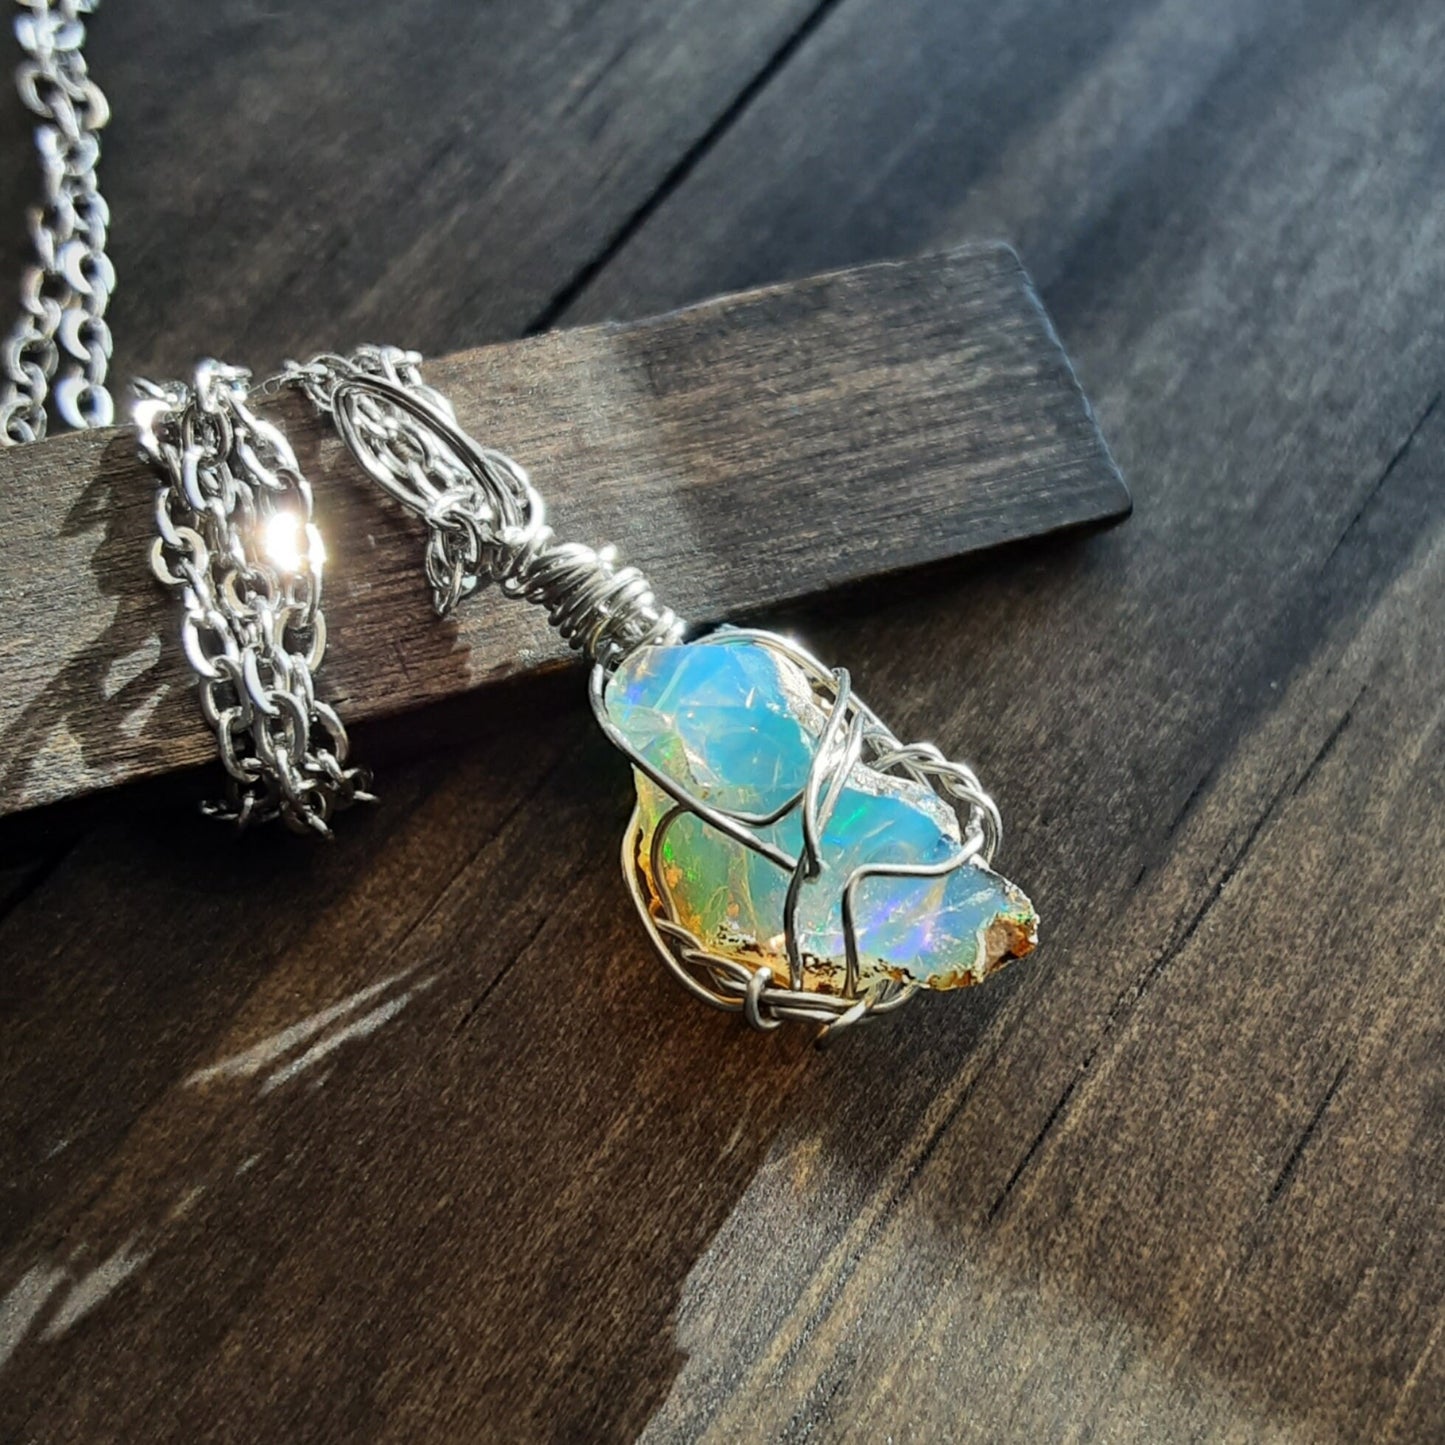 Raw Opal Pendant Necklace, Grade AA Welo, Stainless steel Hypoallergenic necklace, October Birthstone Jewelry, Gift idea